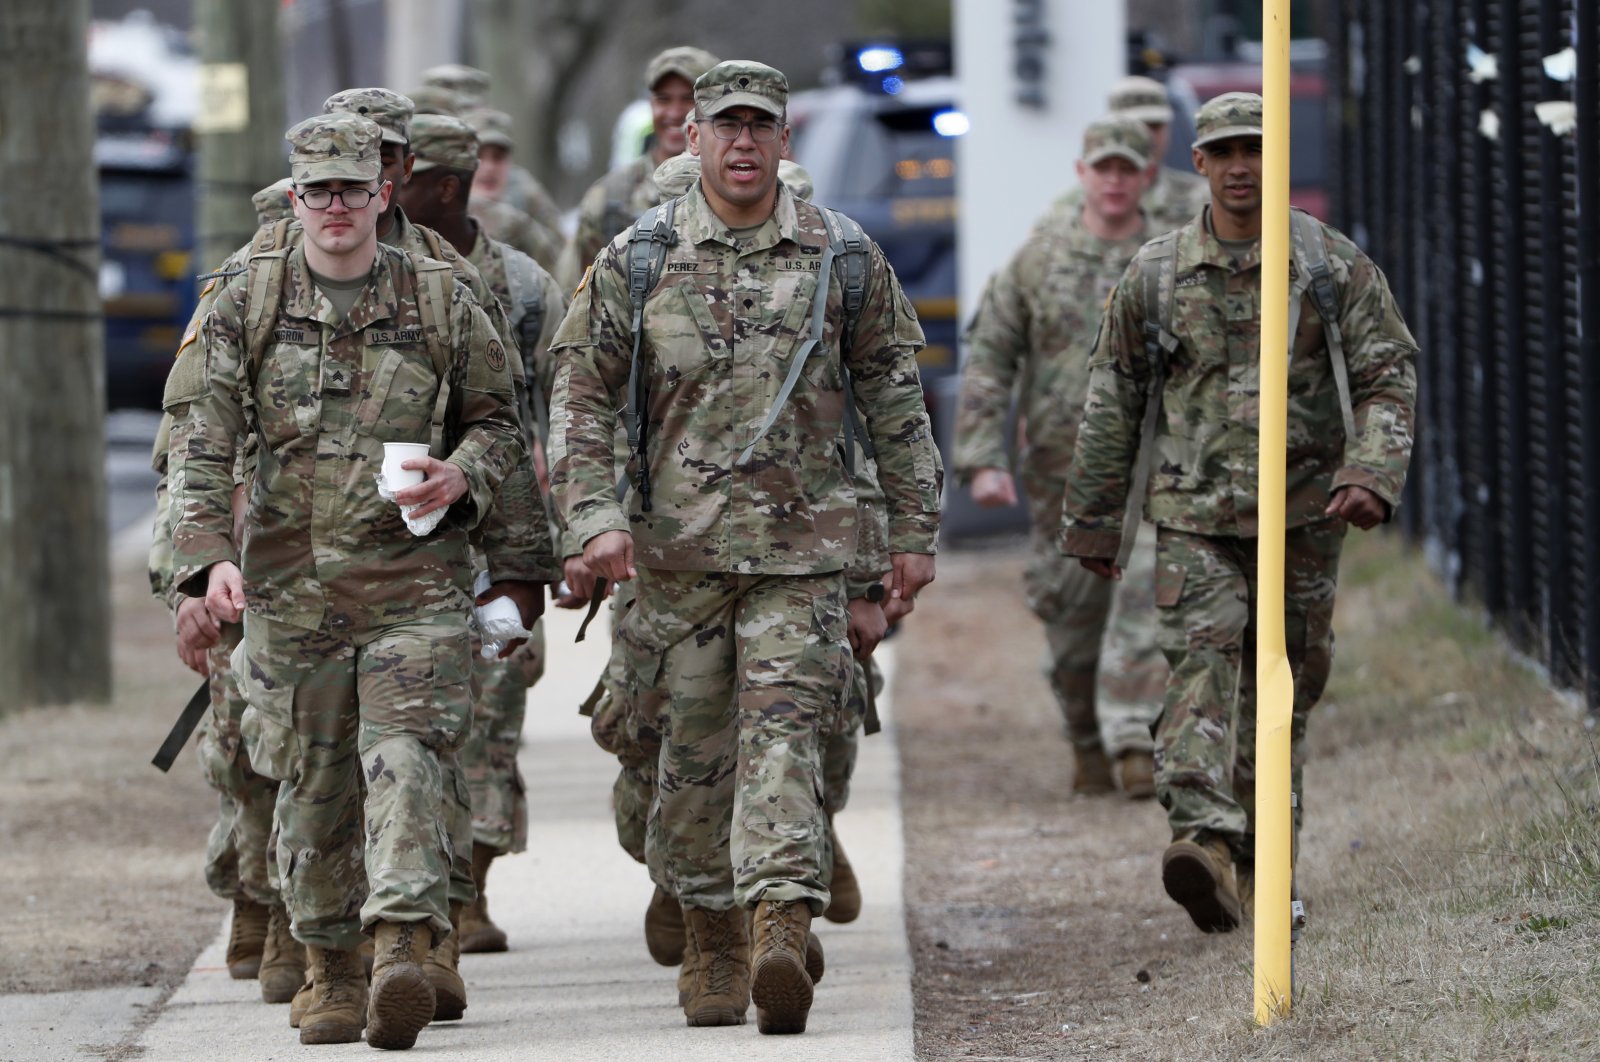 National Guard personnel march in formation as they leave duty after working Thursday, March 19, 2020, at a state-managed coronavirus drive-through testing site that just opened on Staten Island in New York. (AP Photo)